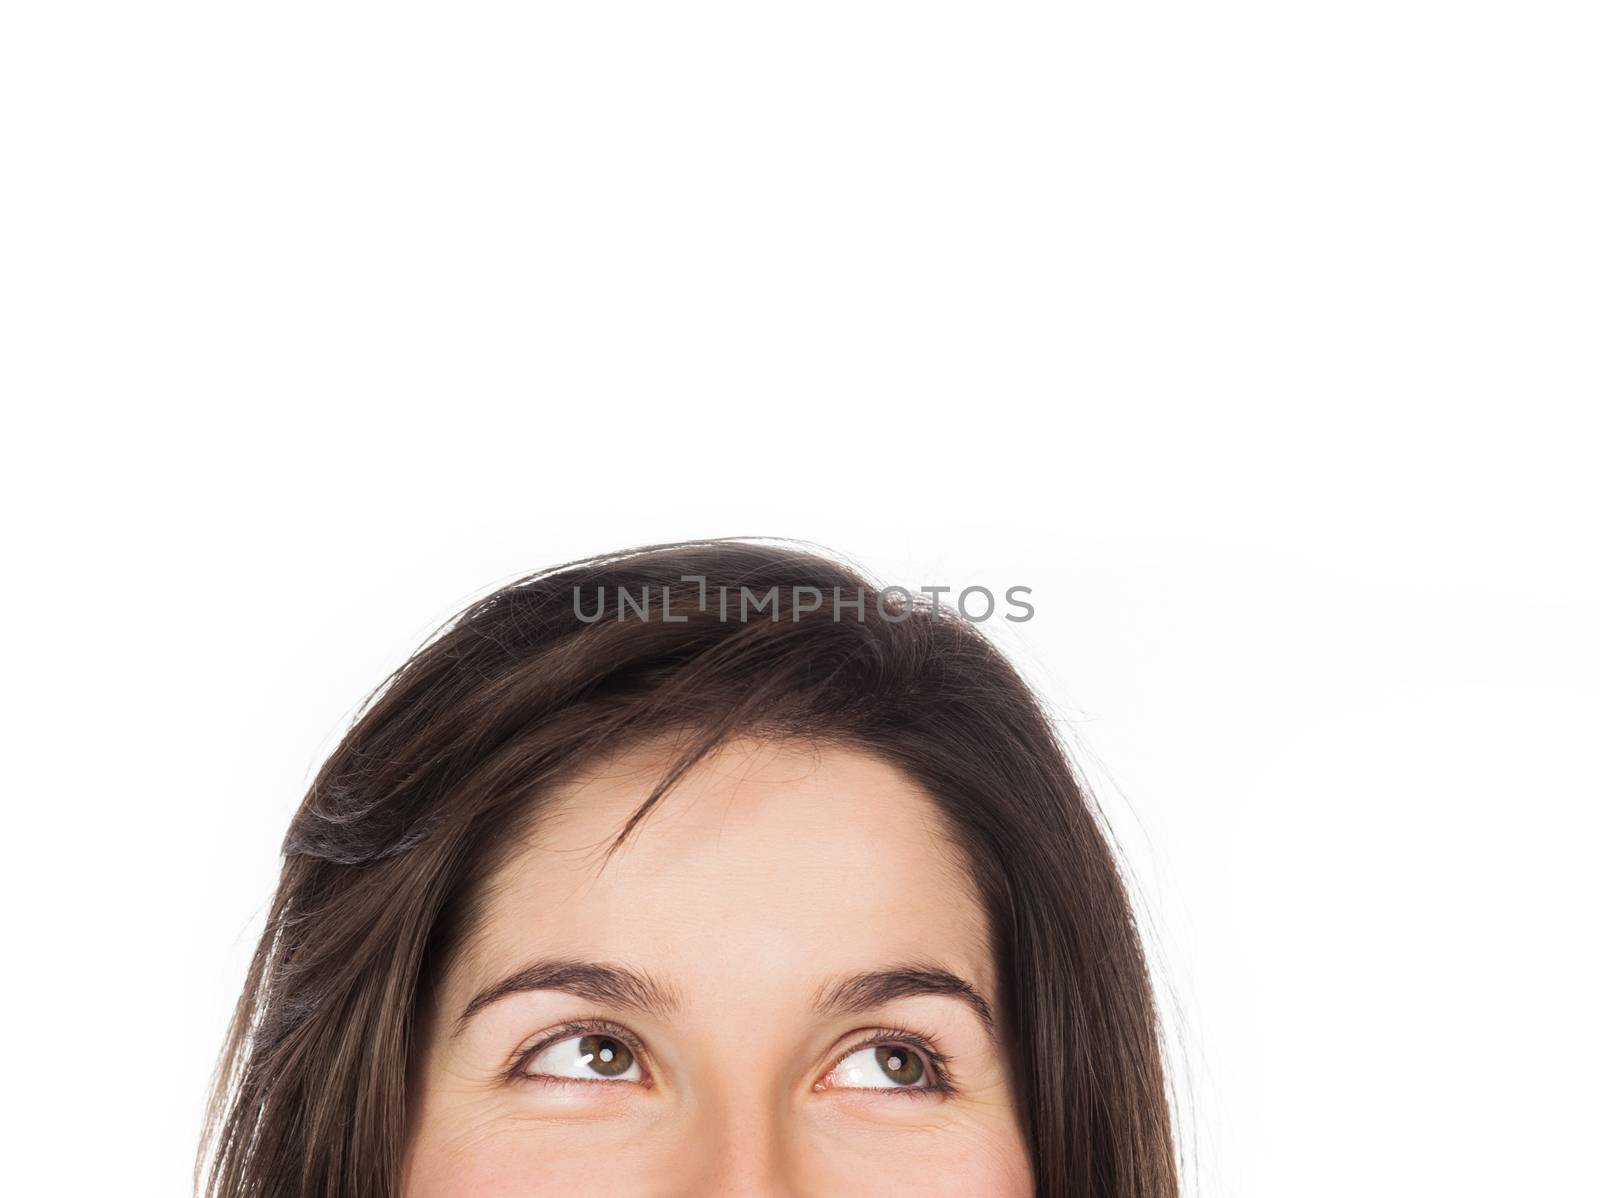 Close-up view of eyes looking up, copy space, isolated on white